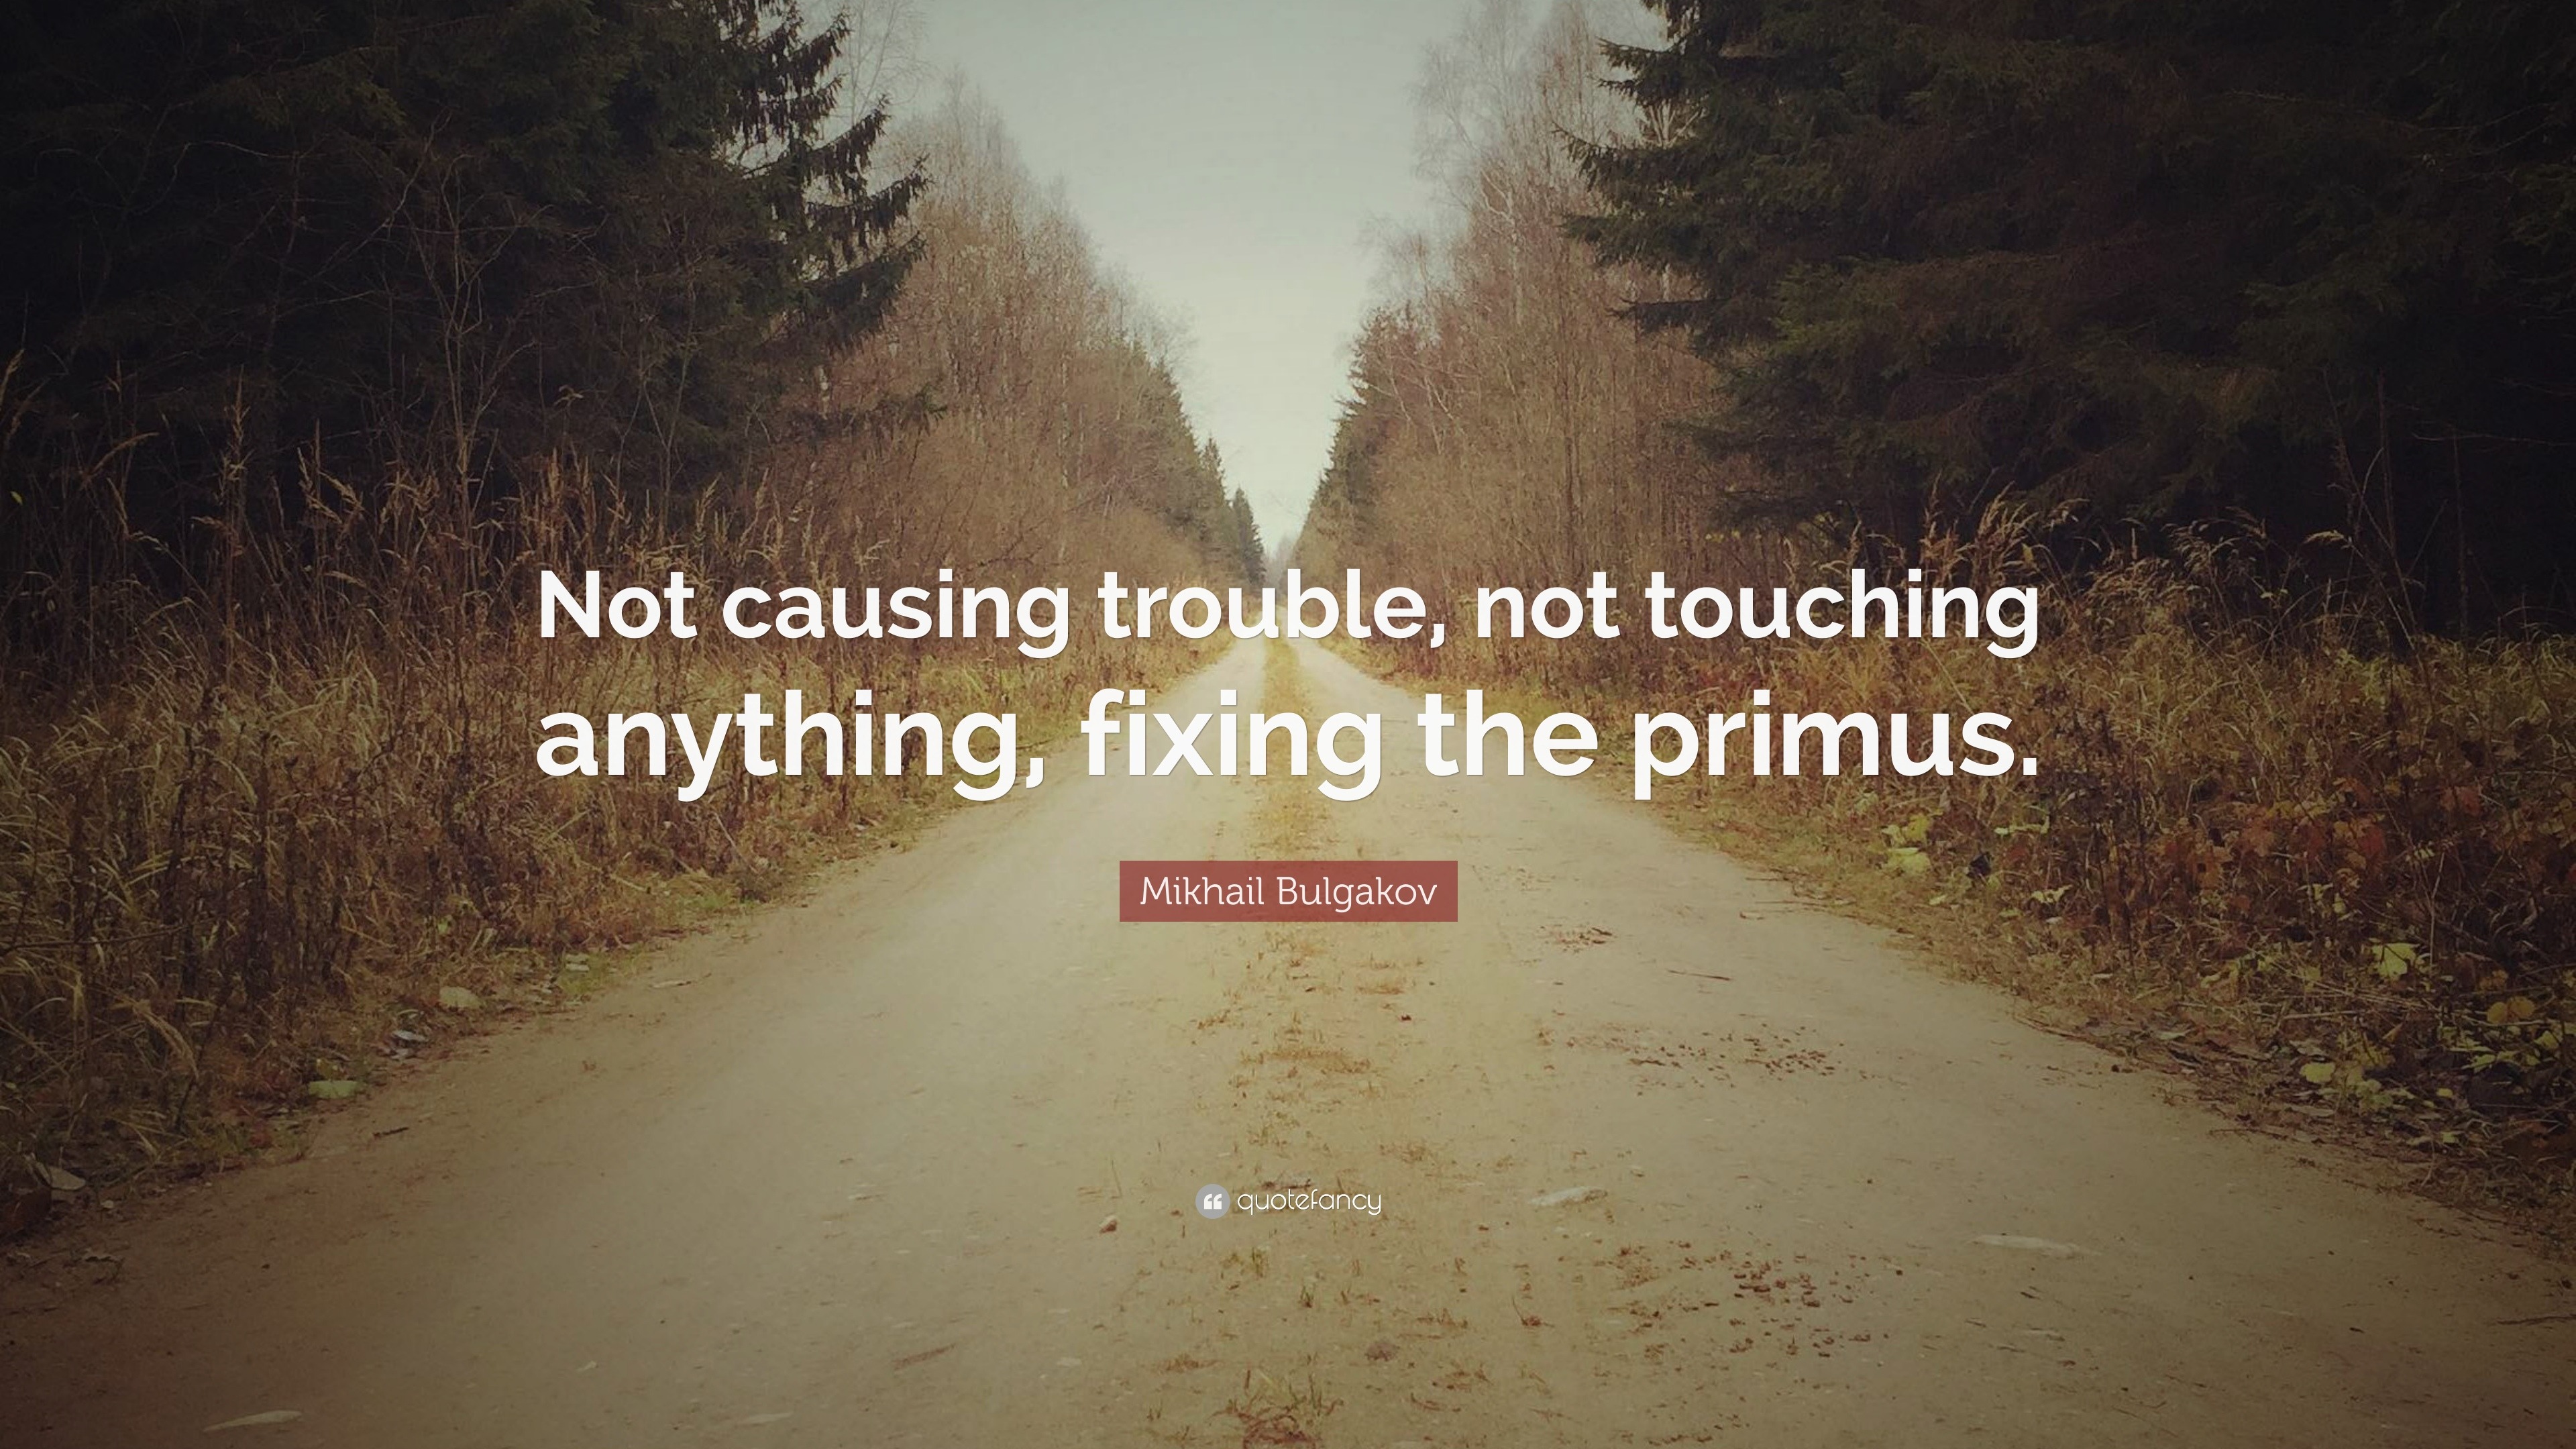 Mikhail Bulgakov Quote Not Causing Trouble Not Touching Anything Fixing The Primus 7 Wallpapers Quotefancy